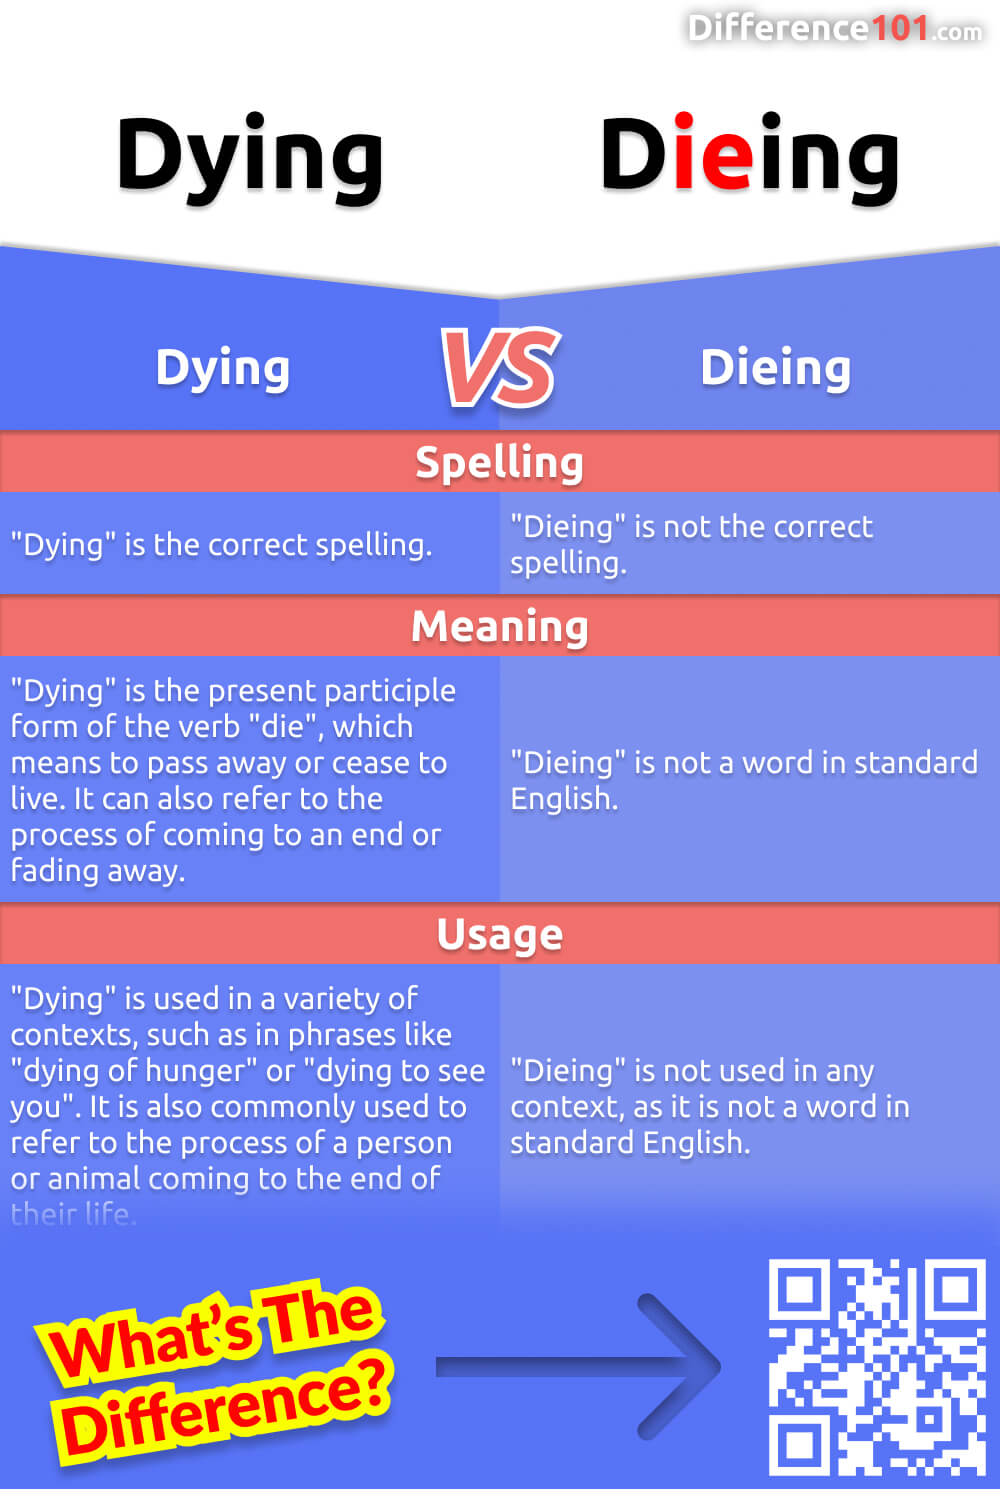 Are you confused about whether to use "dying" or "dieing"? This article will help clear things up. We'll cover the differences between the two words and when to use each one.